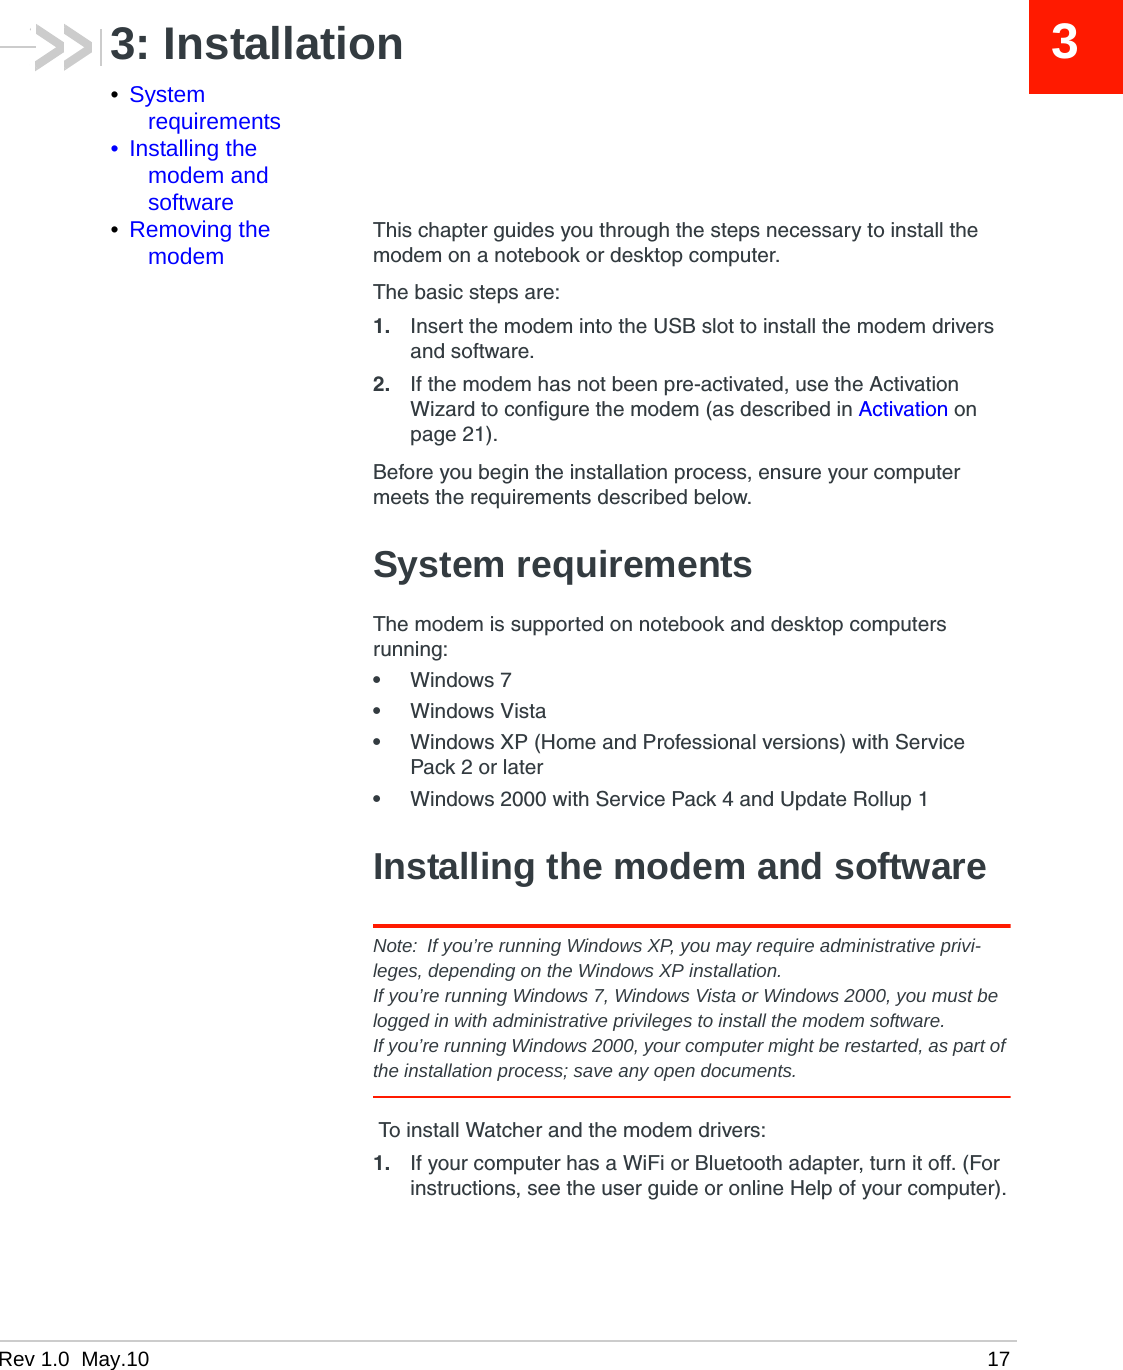 Rev 1.0  May.10 1733: Installation•System requirements• Installing the modem and software•Removing the modemThis chapter guides you through the steps necessary to install the modem on a notebook or desktop computer.The basic steps are:1. Insert the modem into the USB slot to install the modem drivers and software.2. If the modem has not been pre-activated, use the Activation Wizard to configure the modem (as described in Activation on page 21).Before you begin the installation process, ensure your computer meets the requirements described below.System requirementsThe modem is supported on notebook and desktop computers running:•Windows 7•Windows Vista•Windows XP (Home and Professional versions) with Service Pack 2 or later•Windows 2000 with Service Pack 4 and Update Rollup 1Installing the modem and softwareNote: If you’re running Windows XP, you may require administrative privi-leges, depending on the Windows XP installation.If you’re running Windows 7, Windows Vista or Windows 2000, you must be logged in with administrative privileges to install the modem software.If you’re running Windows 2000, your computer might be restarted, as part of the installation process; save any open documents. To install Watcher and the modem drivers:1. If your computer has a WiFi or Bluetooth adapter, turn it off. (For instructions, see the user guide or online Help of your computer).